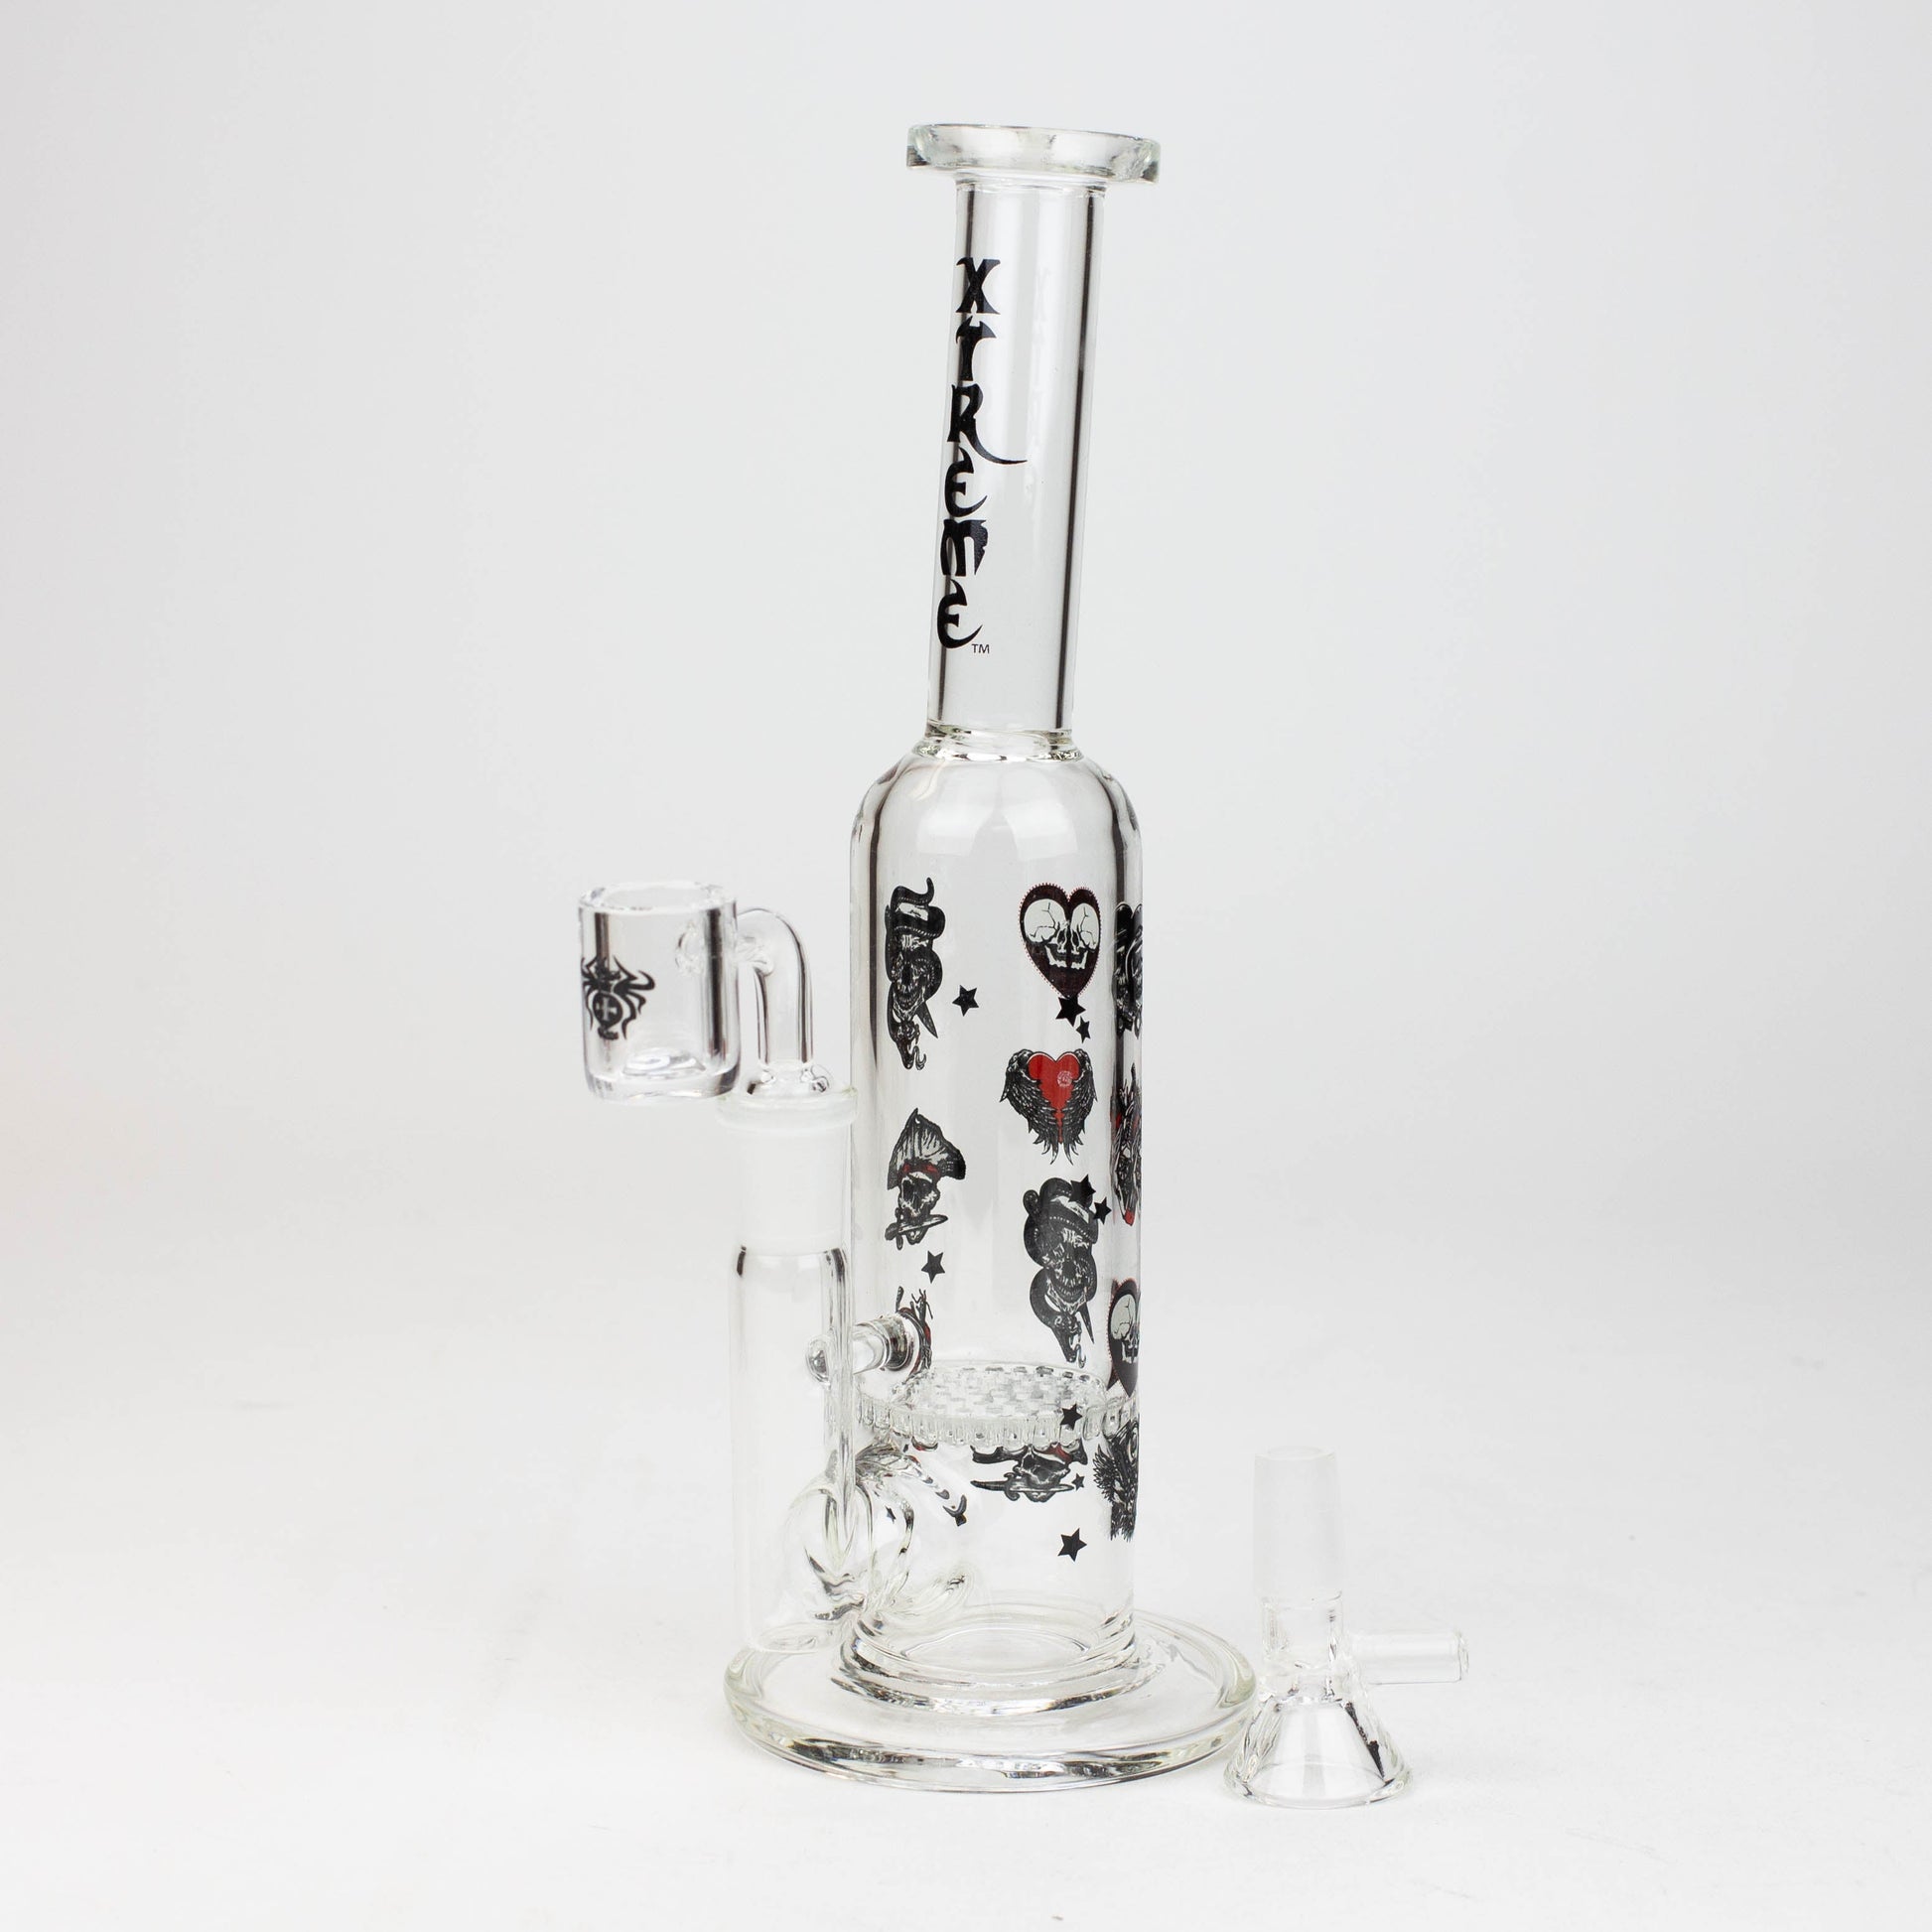 9.5" XTREME 2-in-1 glass Bong with honeycomb diffuser [XTR302]_5